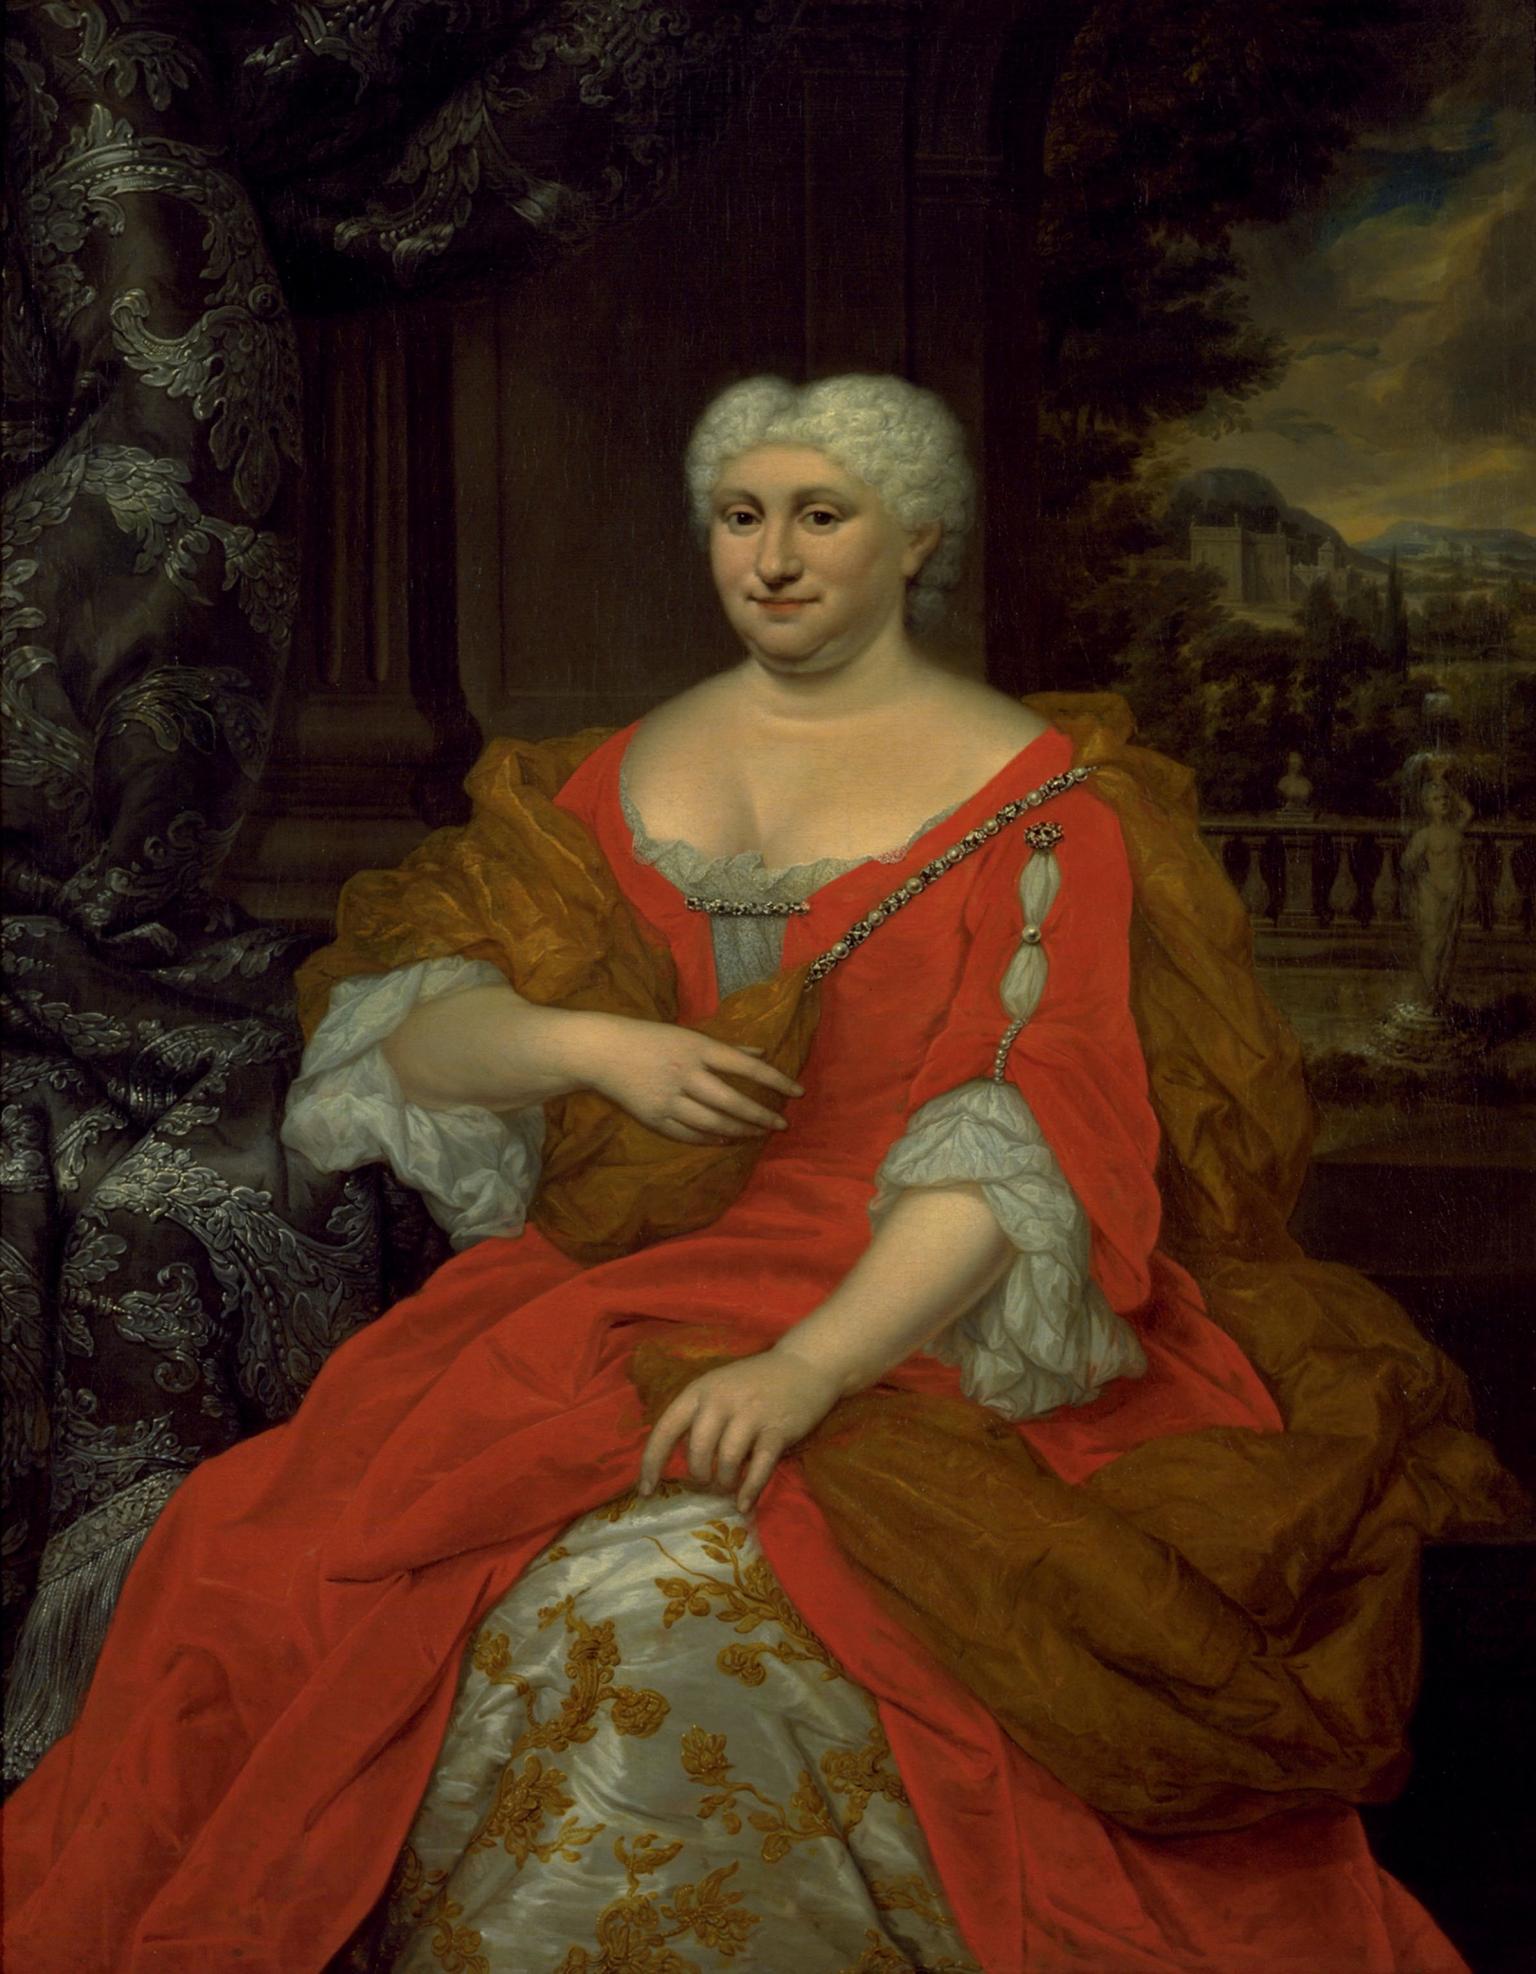 Portrait painting of seated woman wearing flowing dress and looking at viewer.